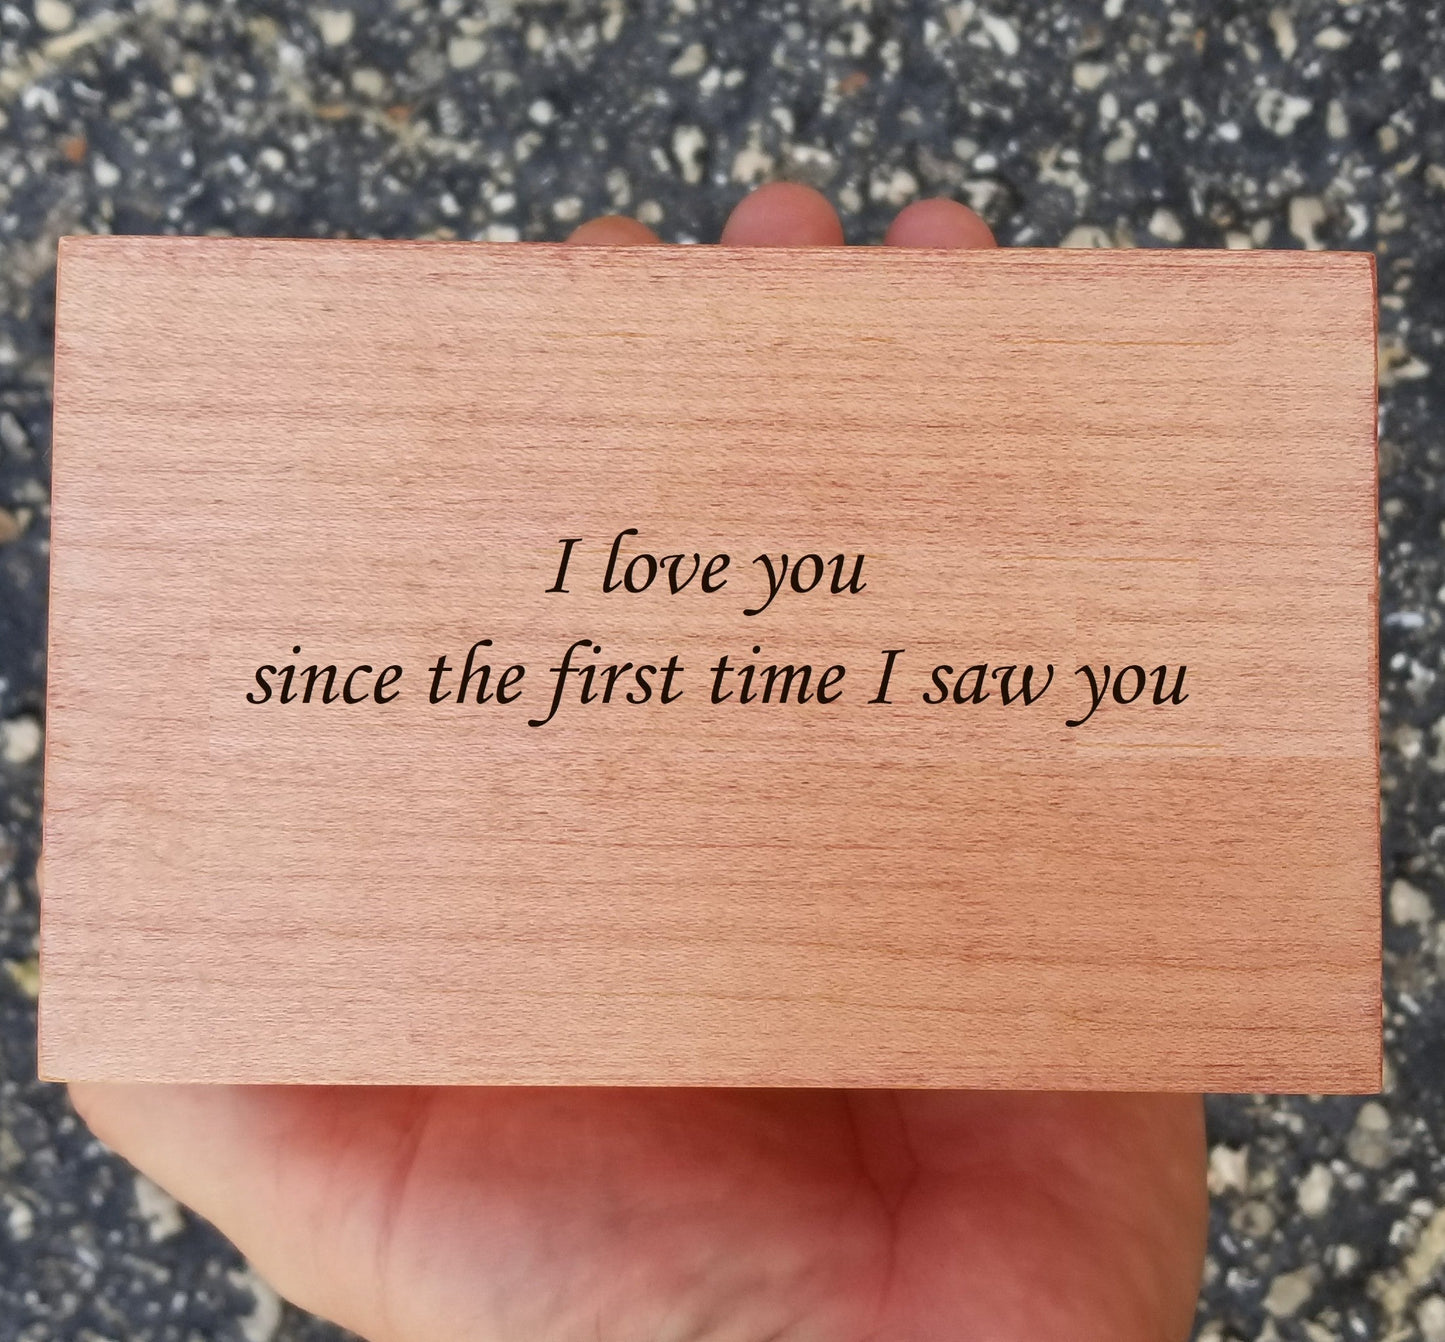 Personalized jewelry box with custom engraving